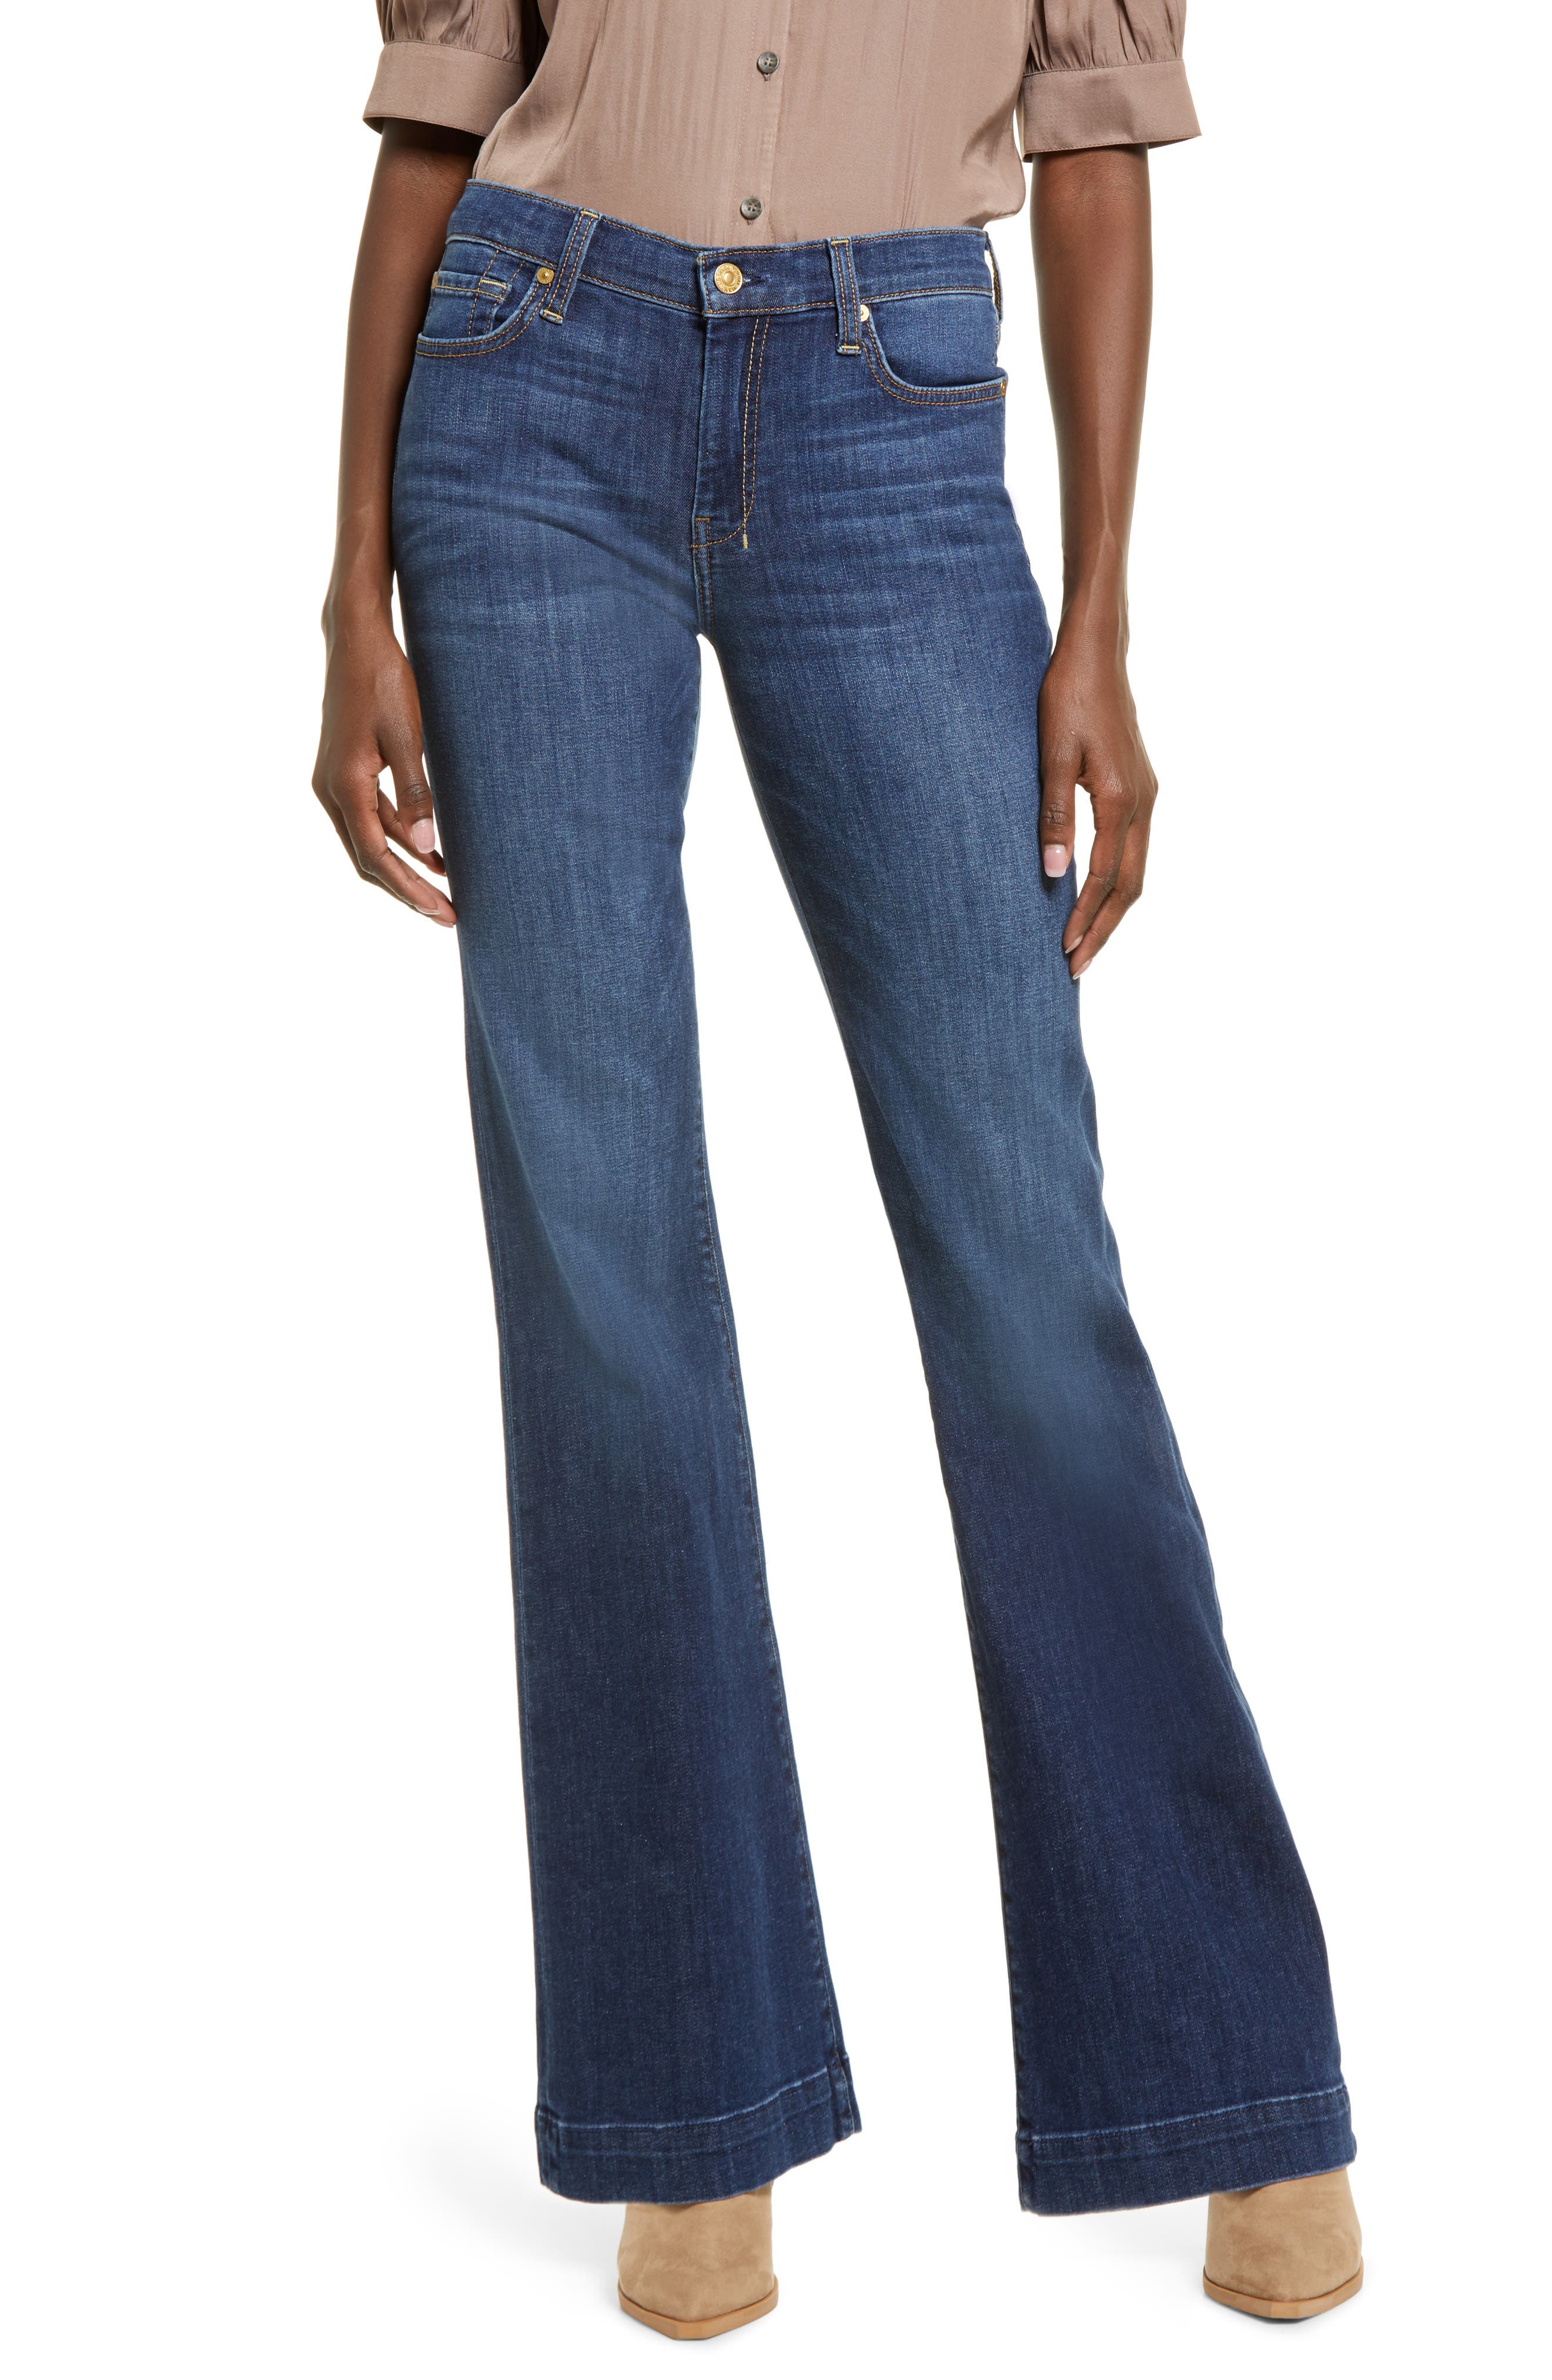 7 for all mankind Damen Jeans 